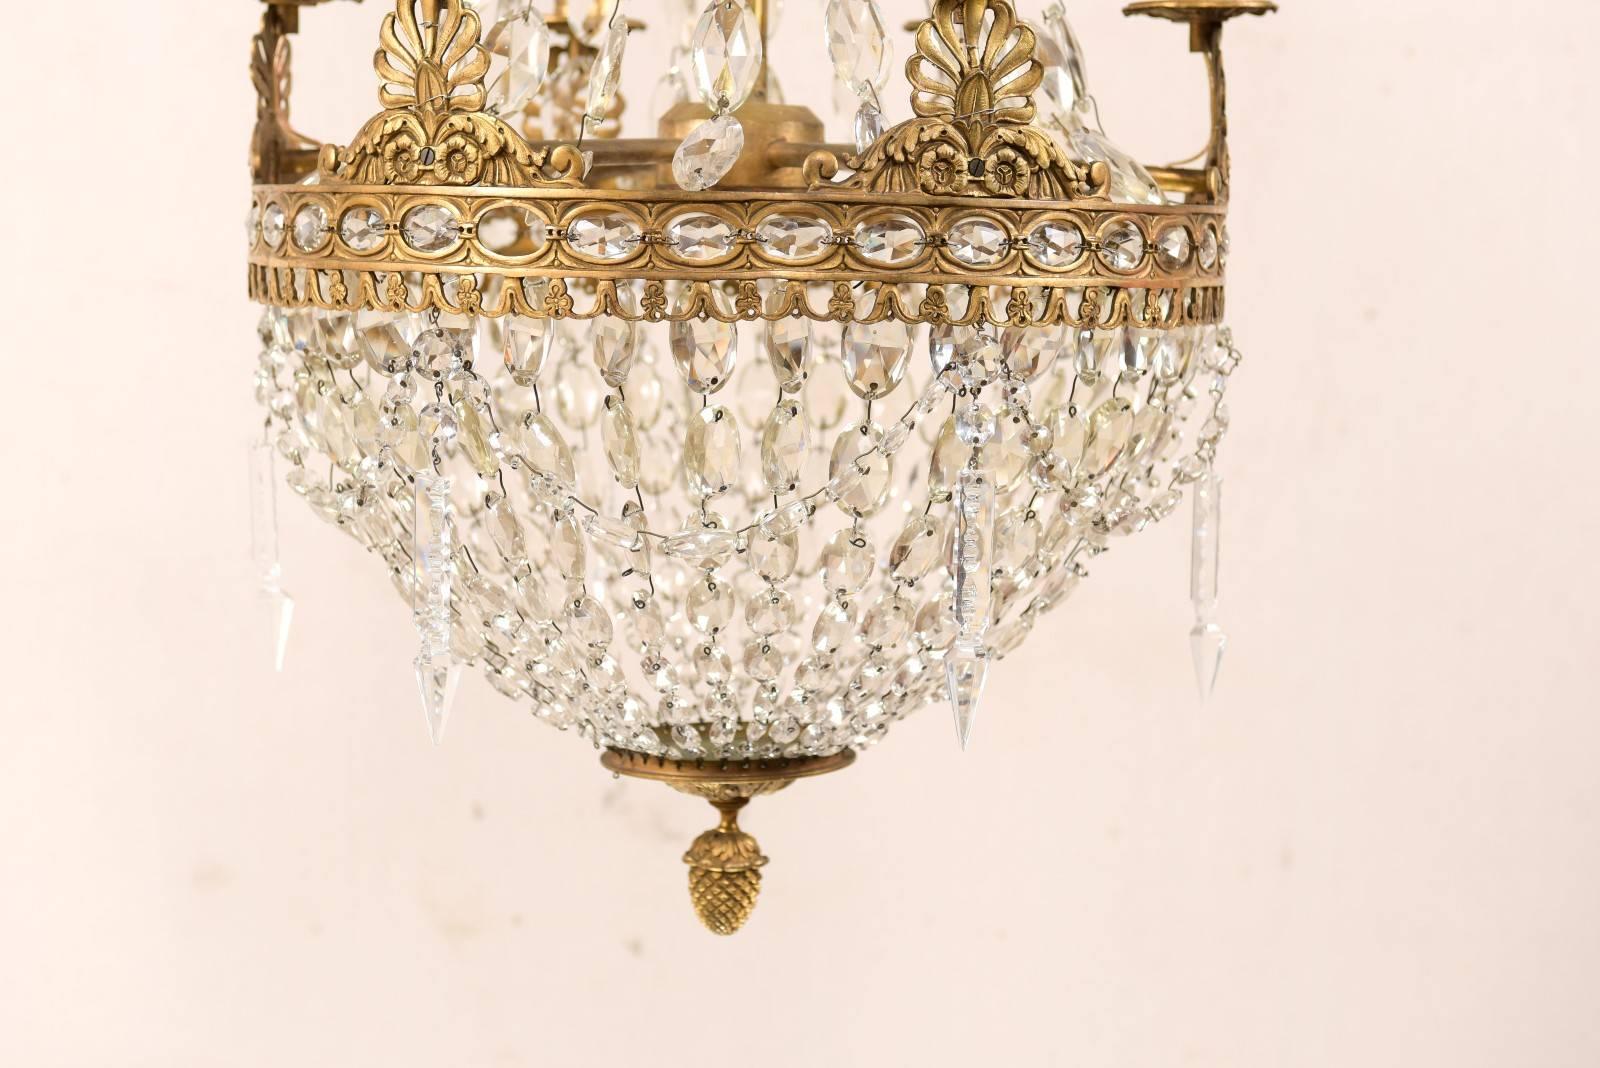 Metal An Exquisite Italian Mid-century Basket-Shaped Crystal and Brass Chandelier For Sale